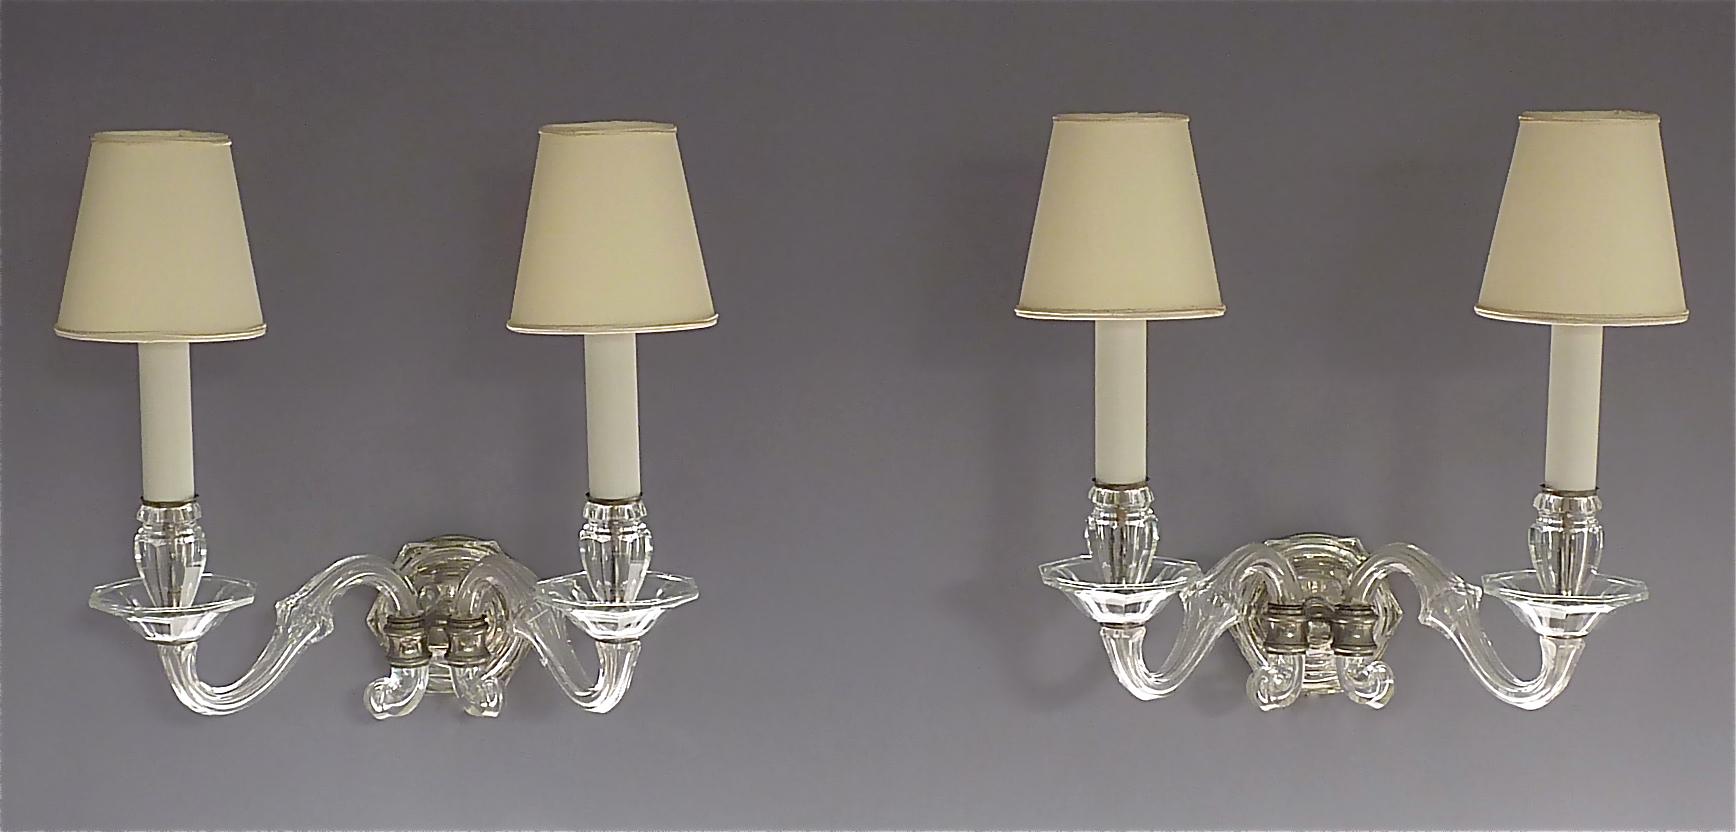 Precious pair of classical Art Deco scrolled 2-arm hand-cut faceted crystal glass sconces or wall lamps with off- white lamp shades in the style of Baccarat, France or Germany circa 1920-30. The beautiful handcrafted crystal glass wall lights are